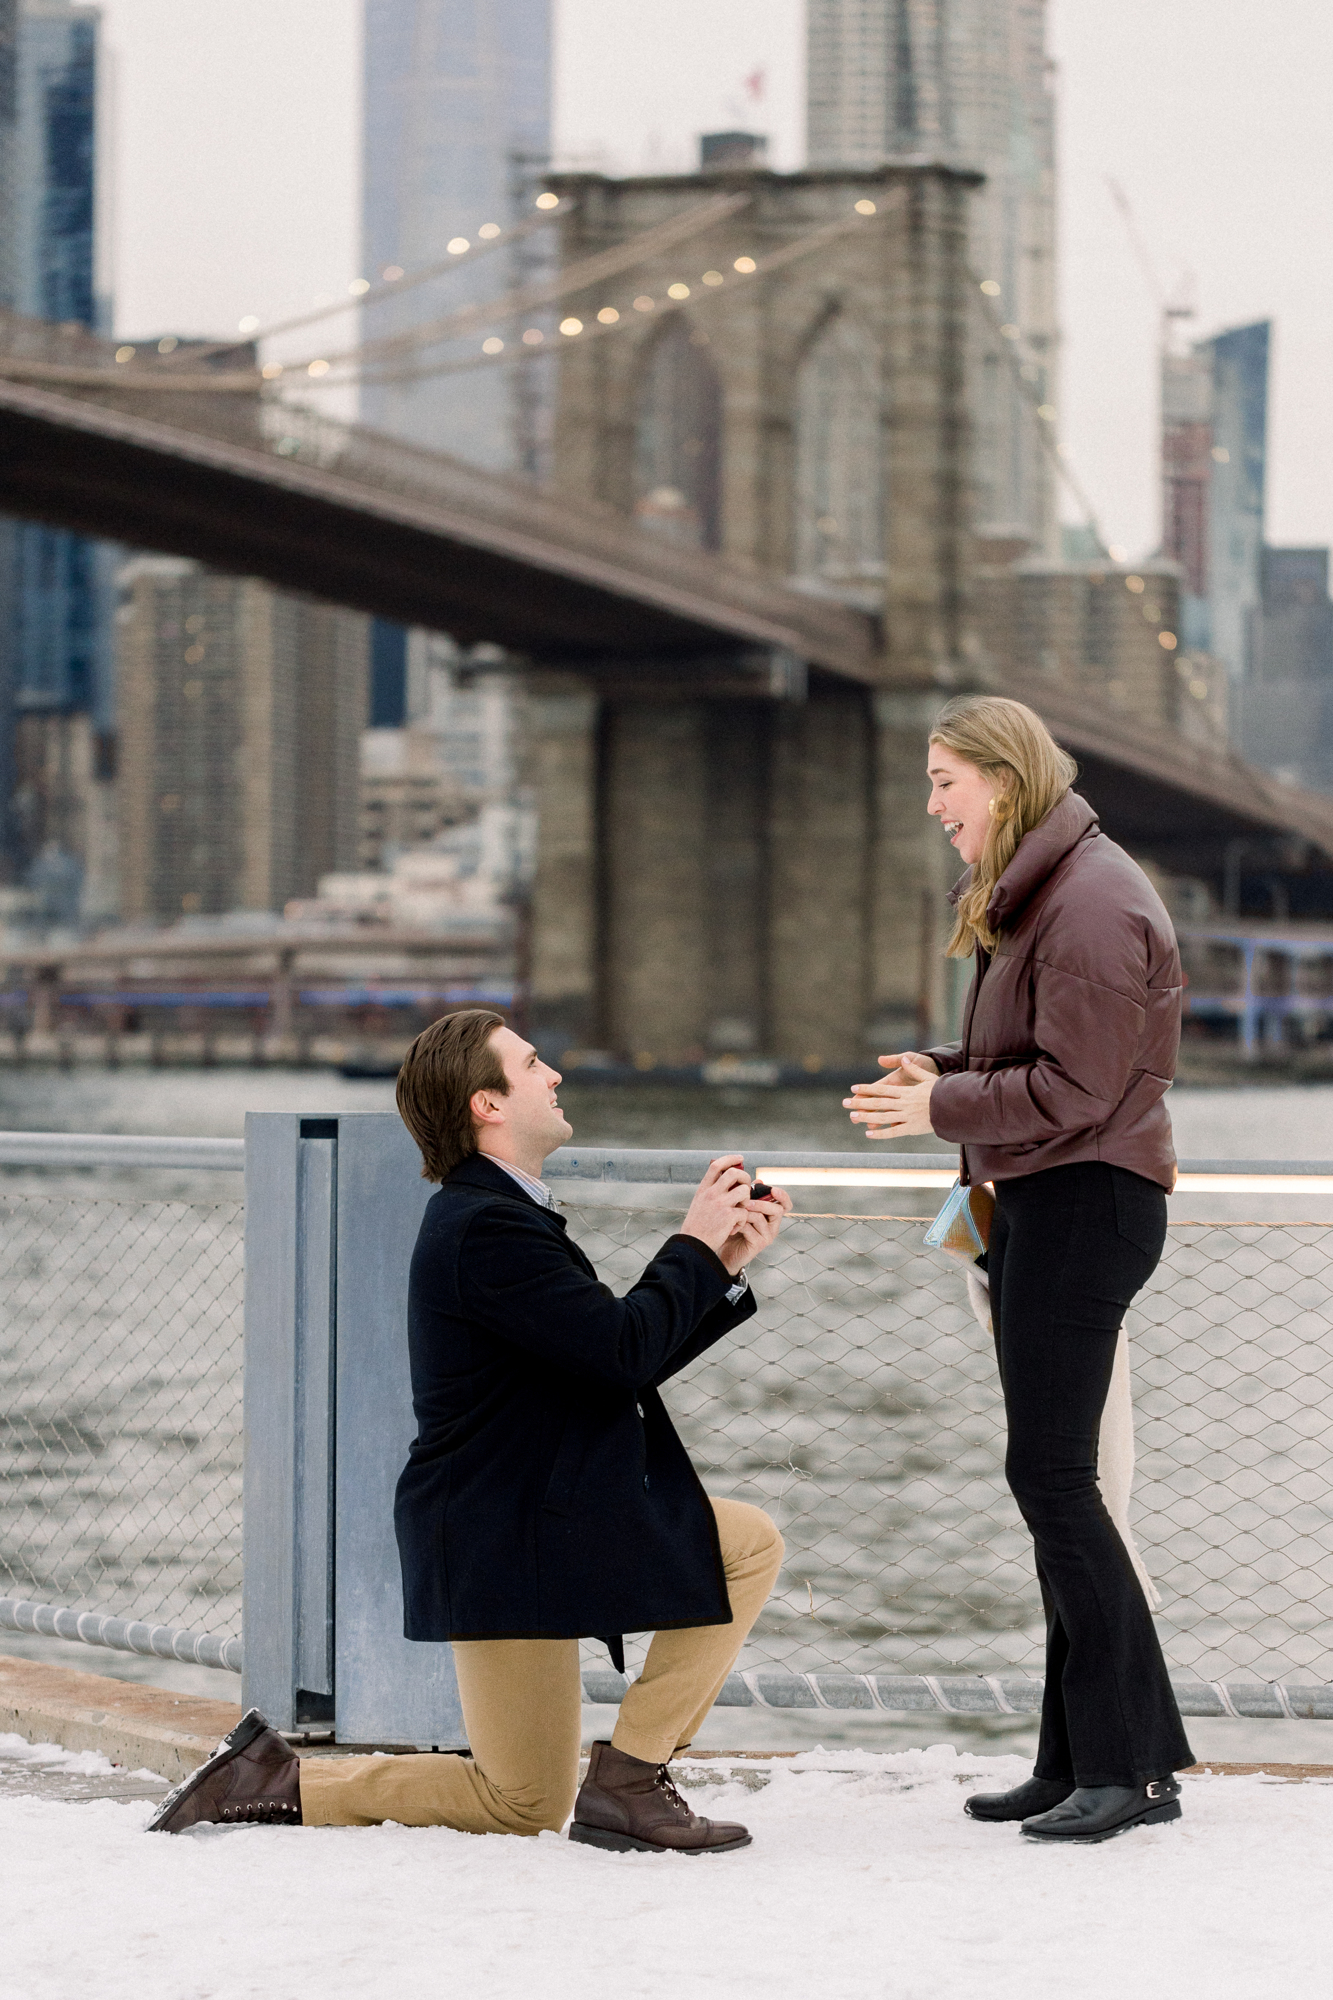 Instagrammable Places to Propose in NYC